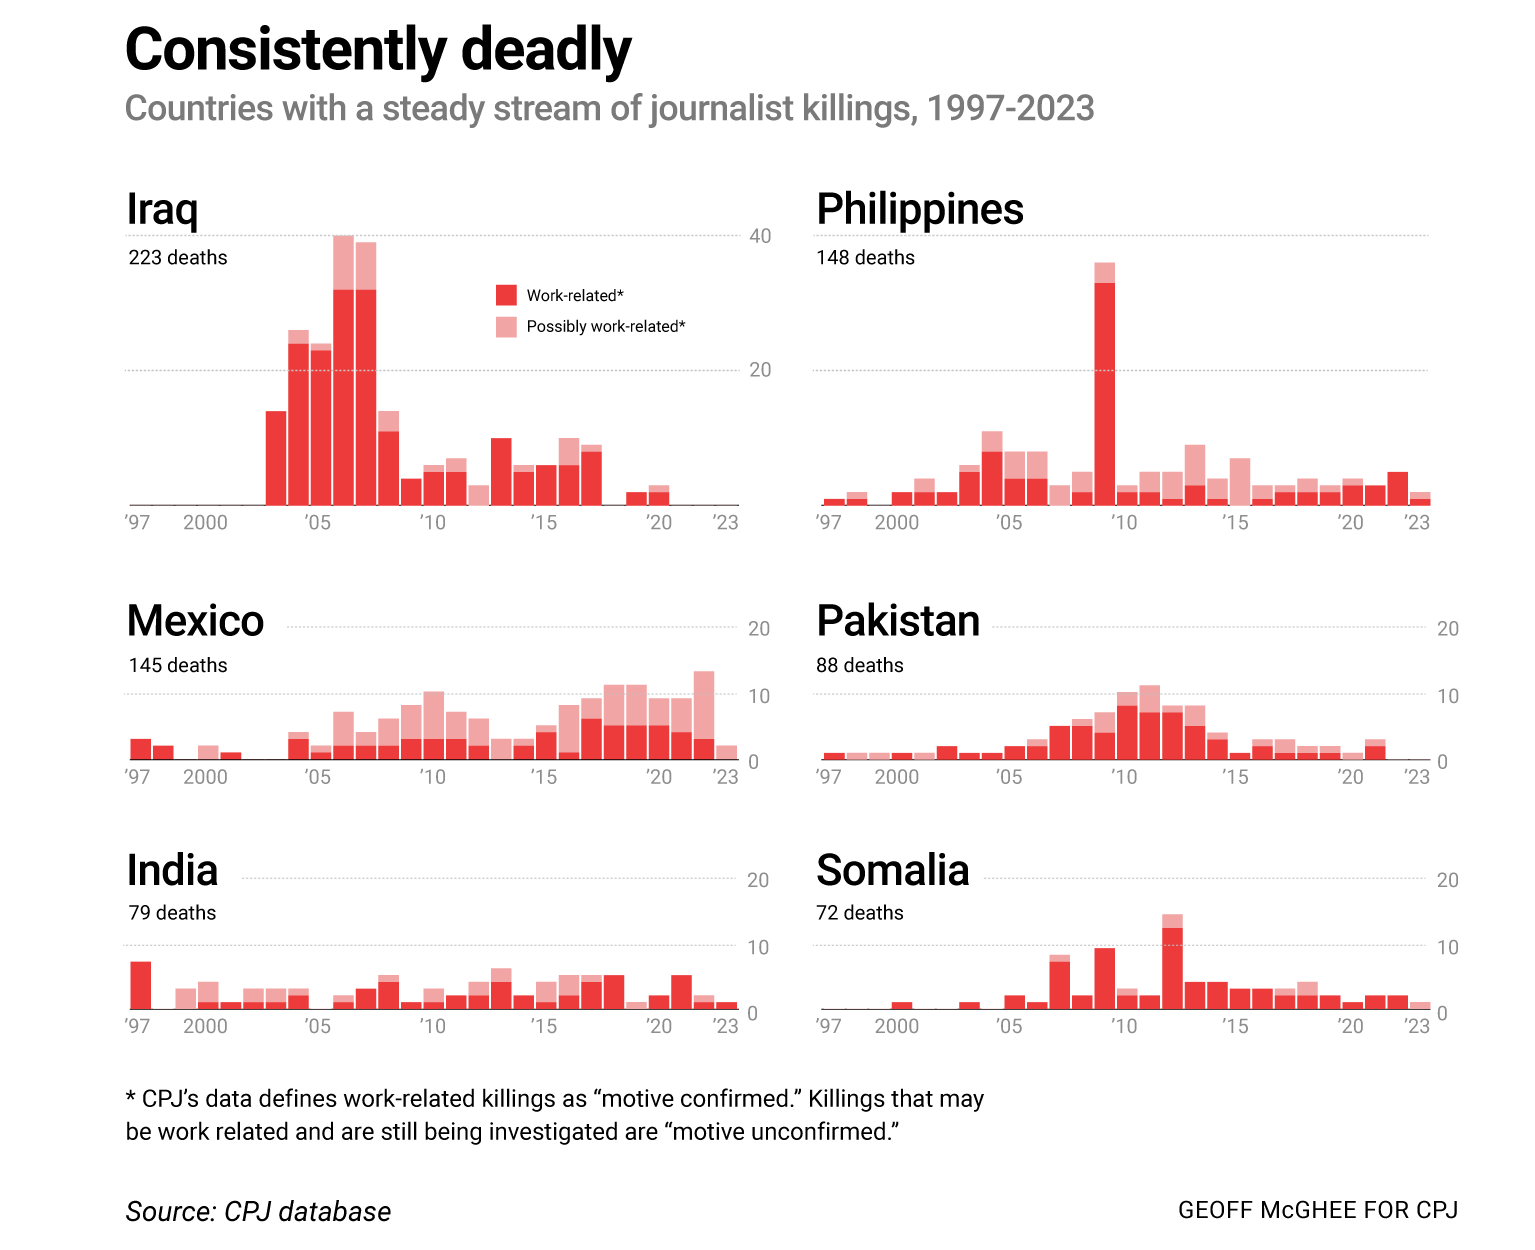 Despite Safety Improvements, Global Journalist Death Toll Hits Highest Since 2015, CPJ Warns of Persistent Risks.